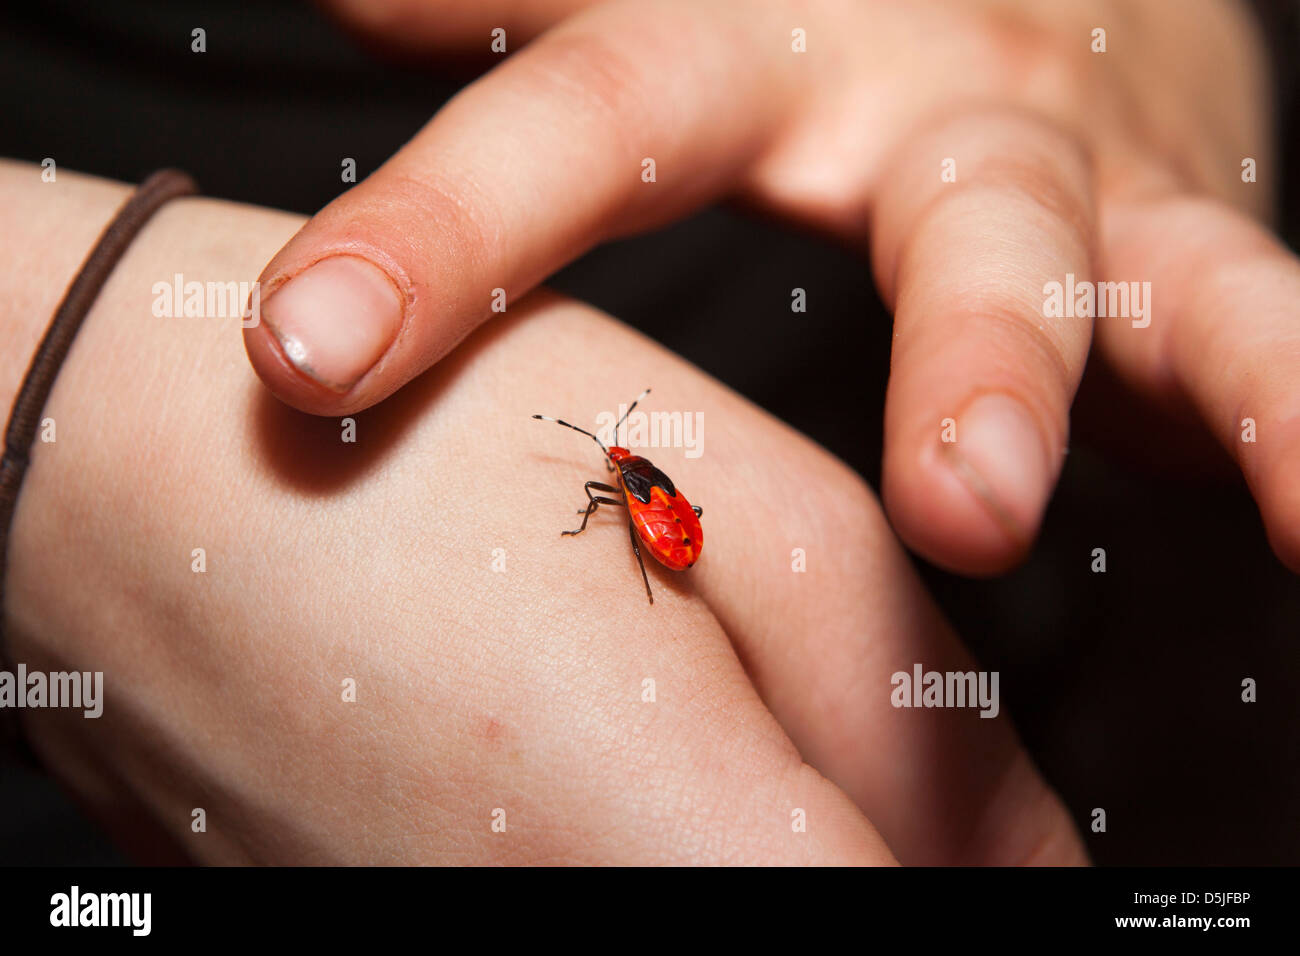 Madagascar, dry forest insects, red shield bug amongst litter on hand of Operation Wallacea student Stock Photo